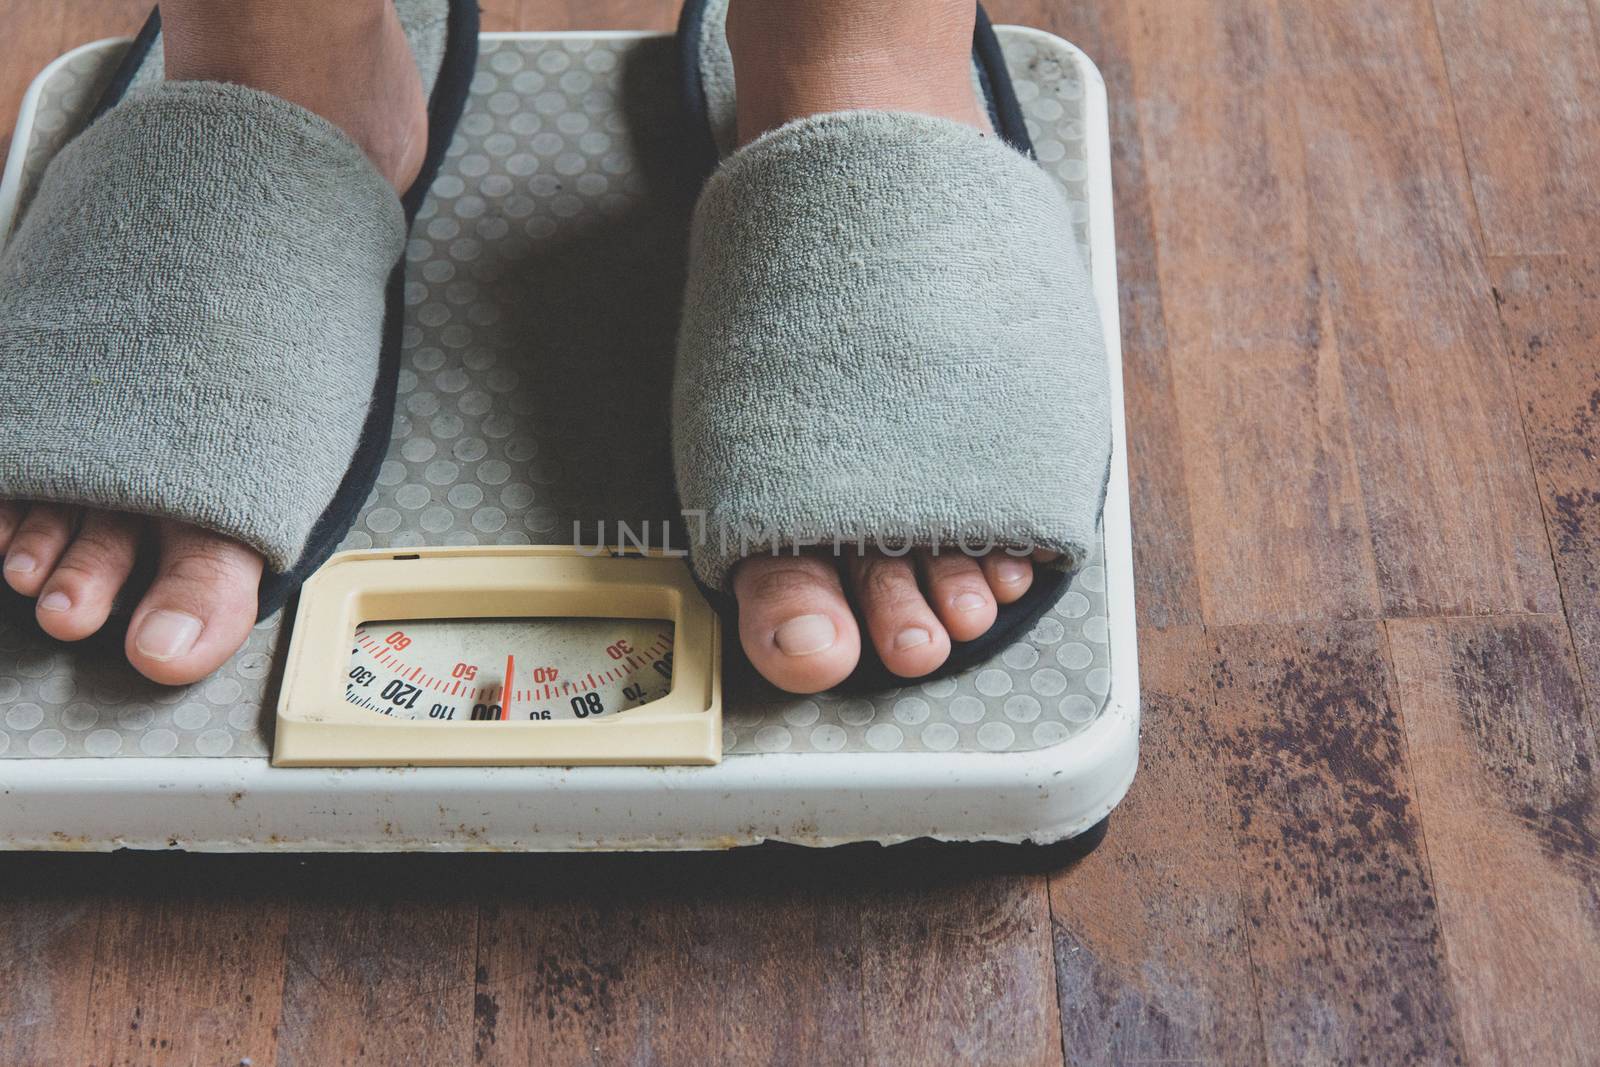 image of woman standing on weighing scale